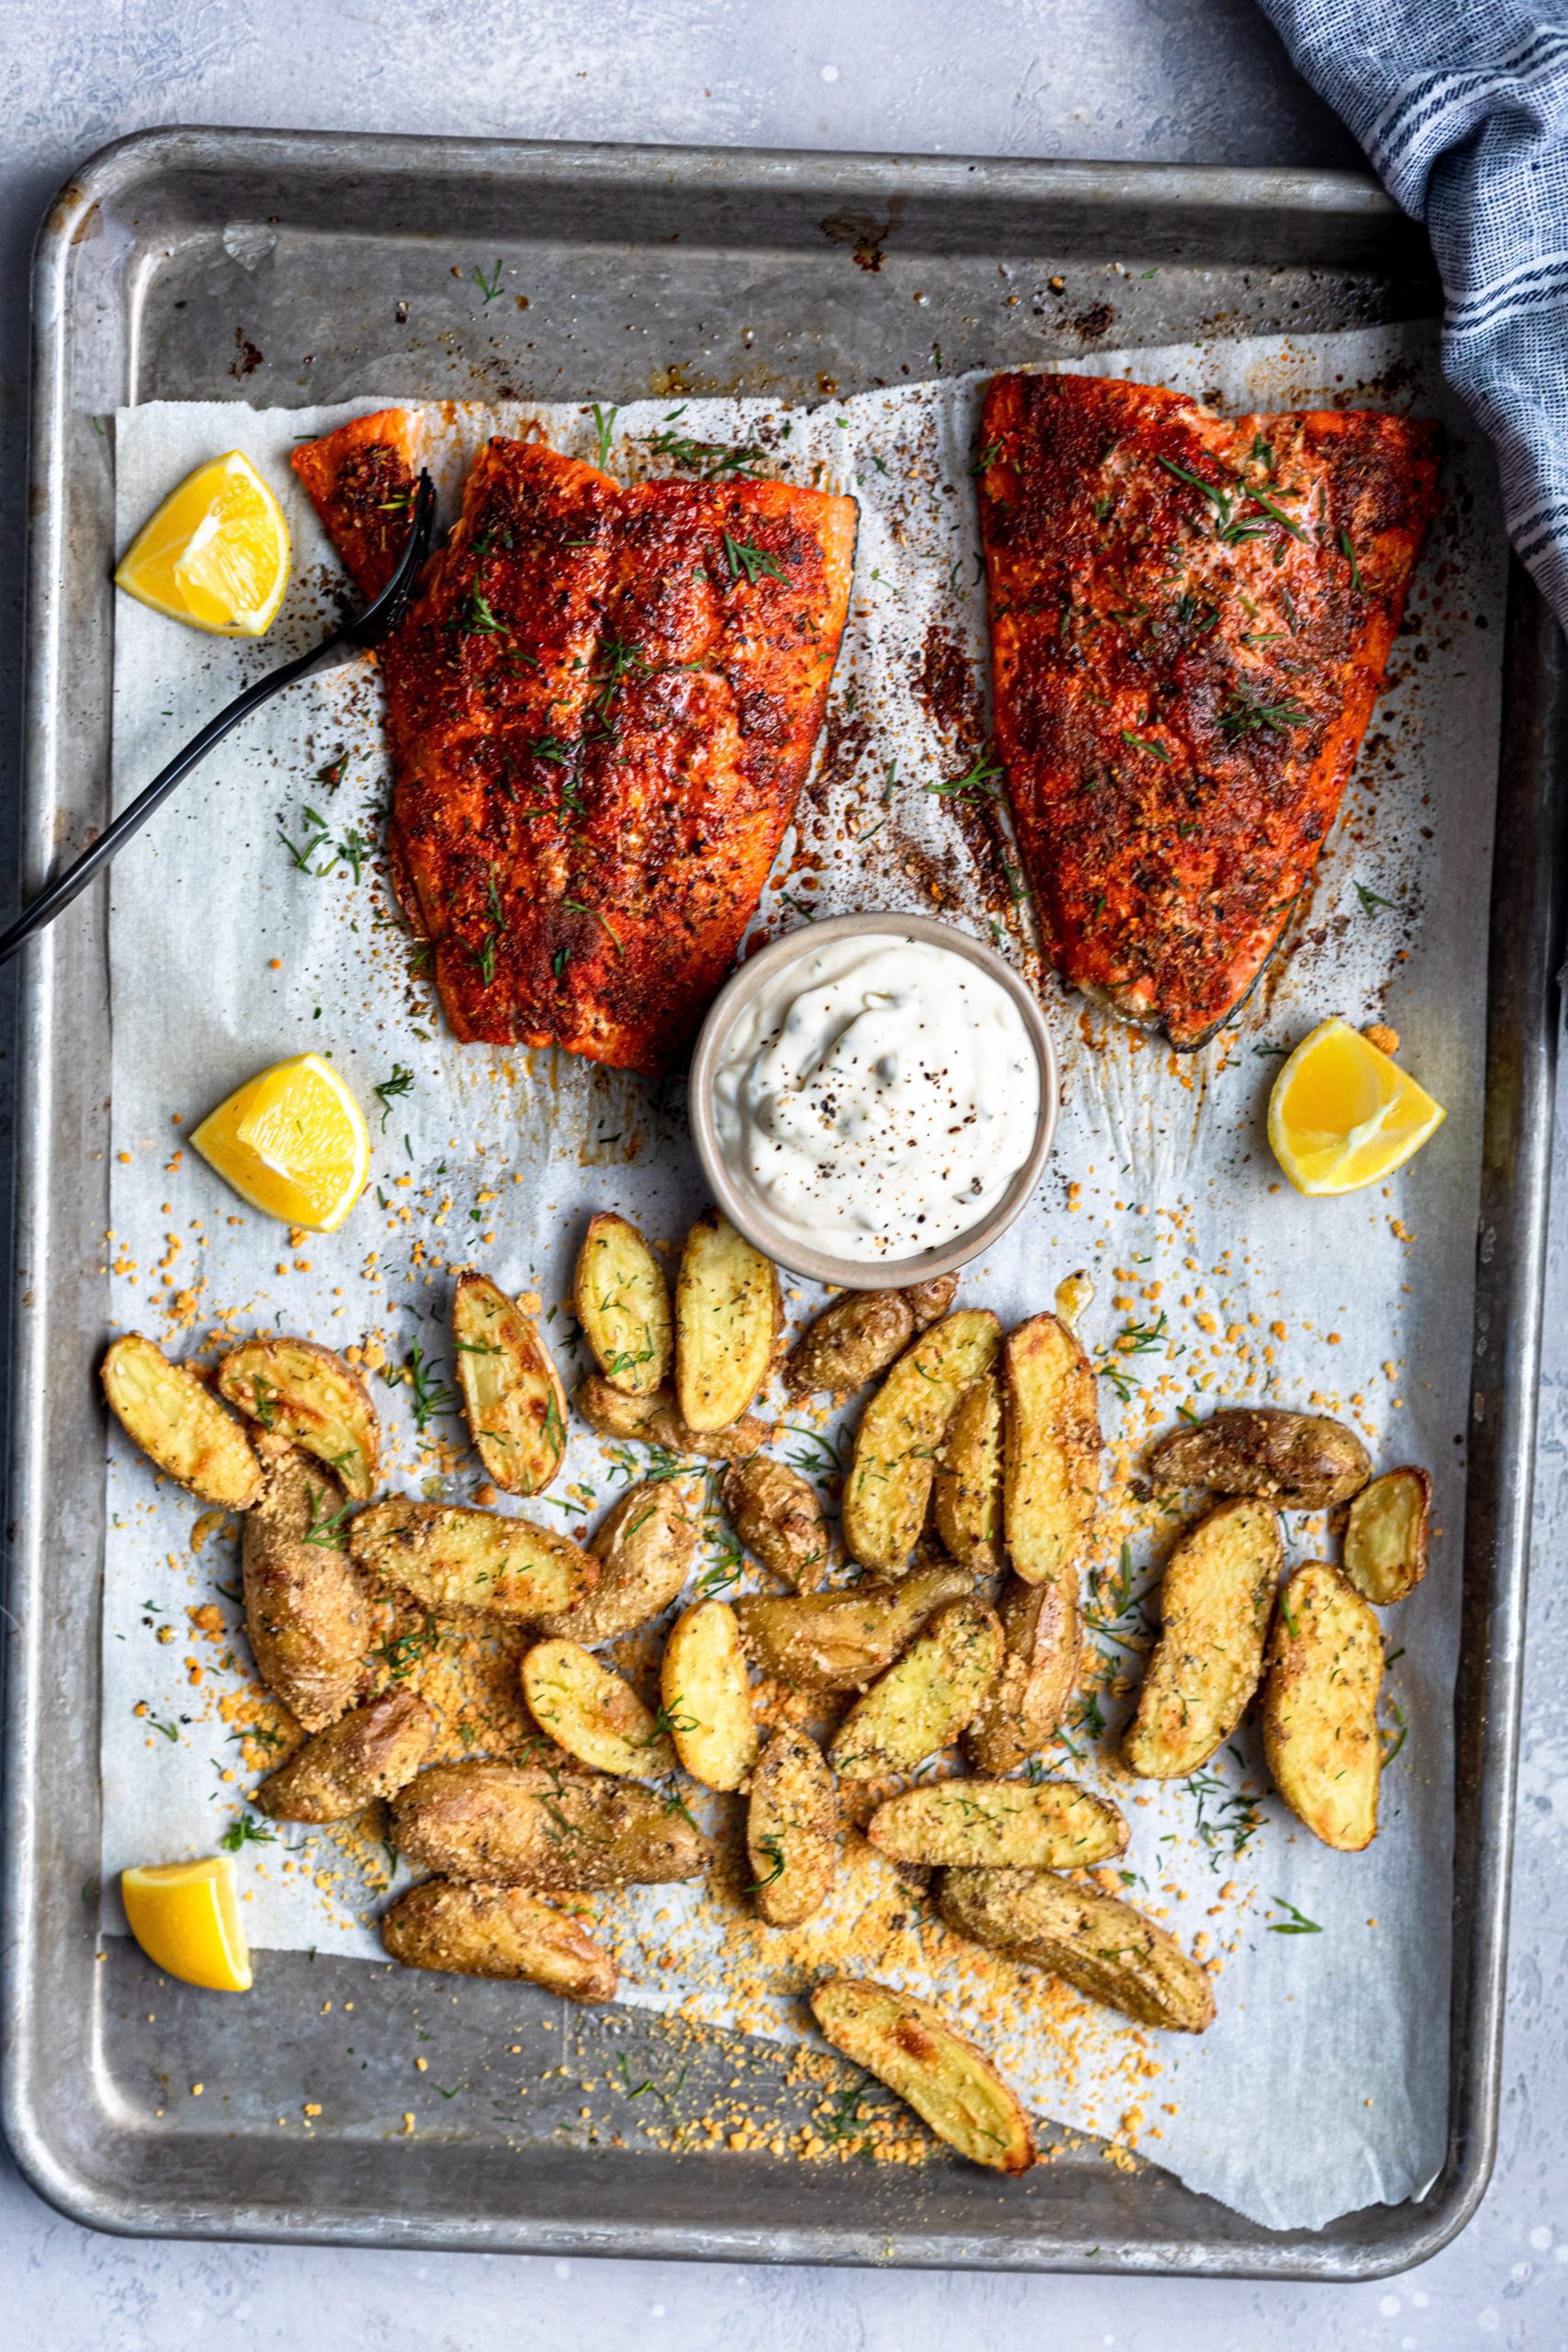 Salmon And Fingerling Potato Sheet Pan Meal For Two 